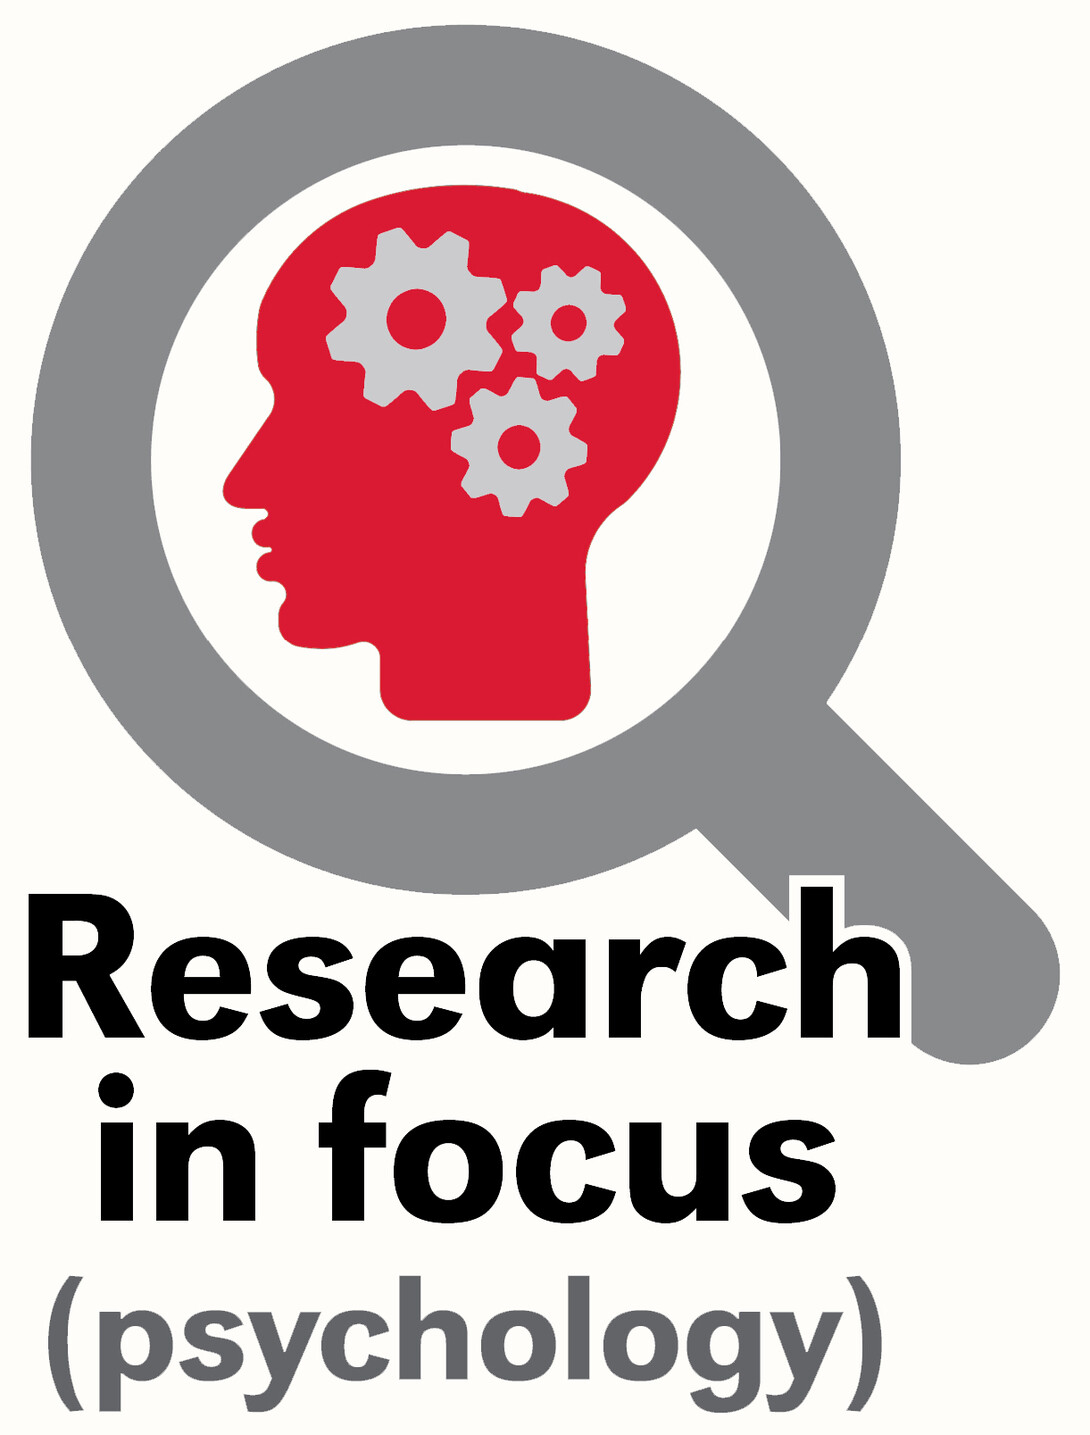 Research in Focus: Psychology